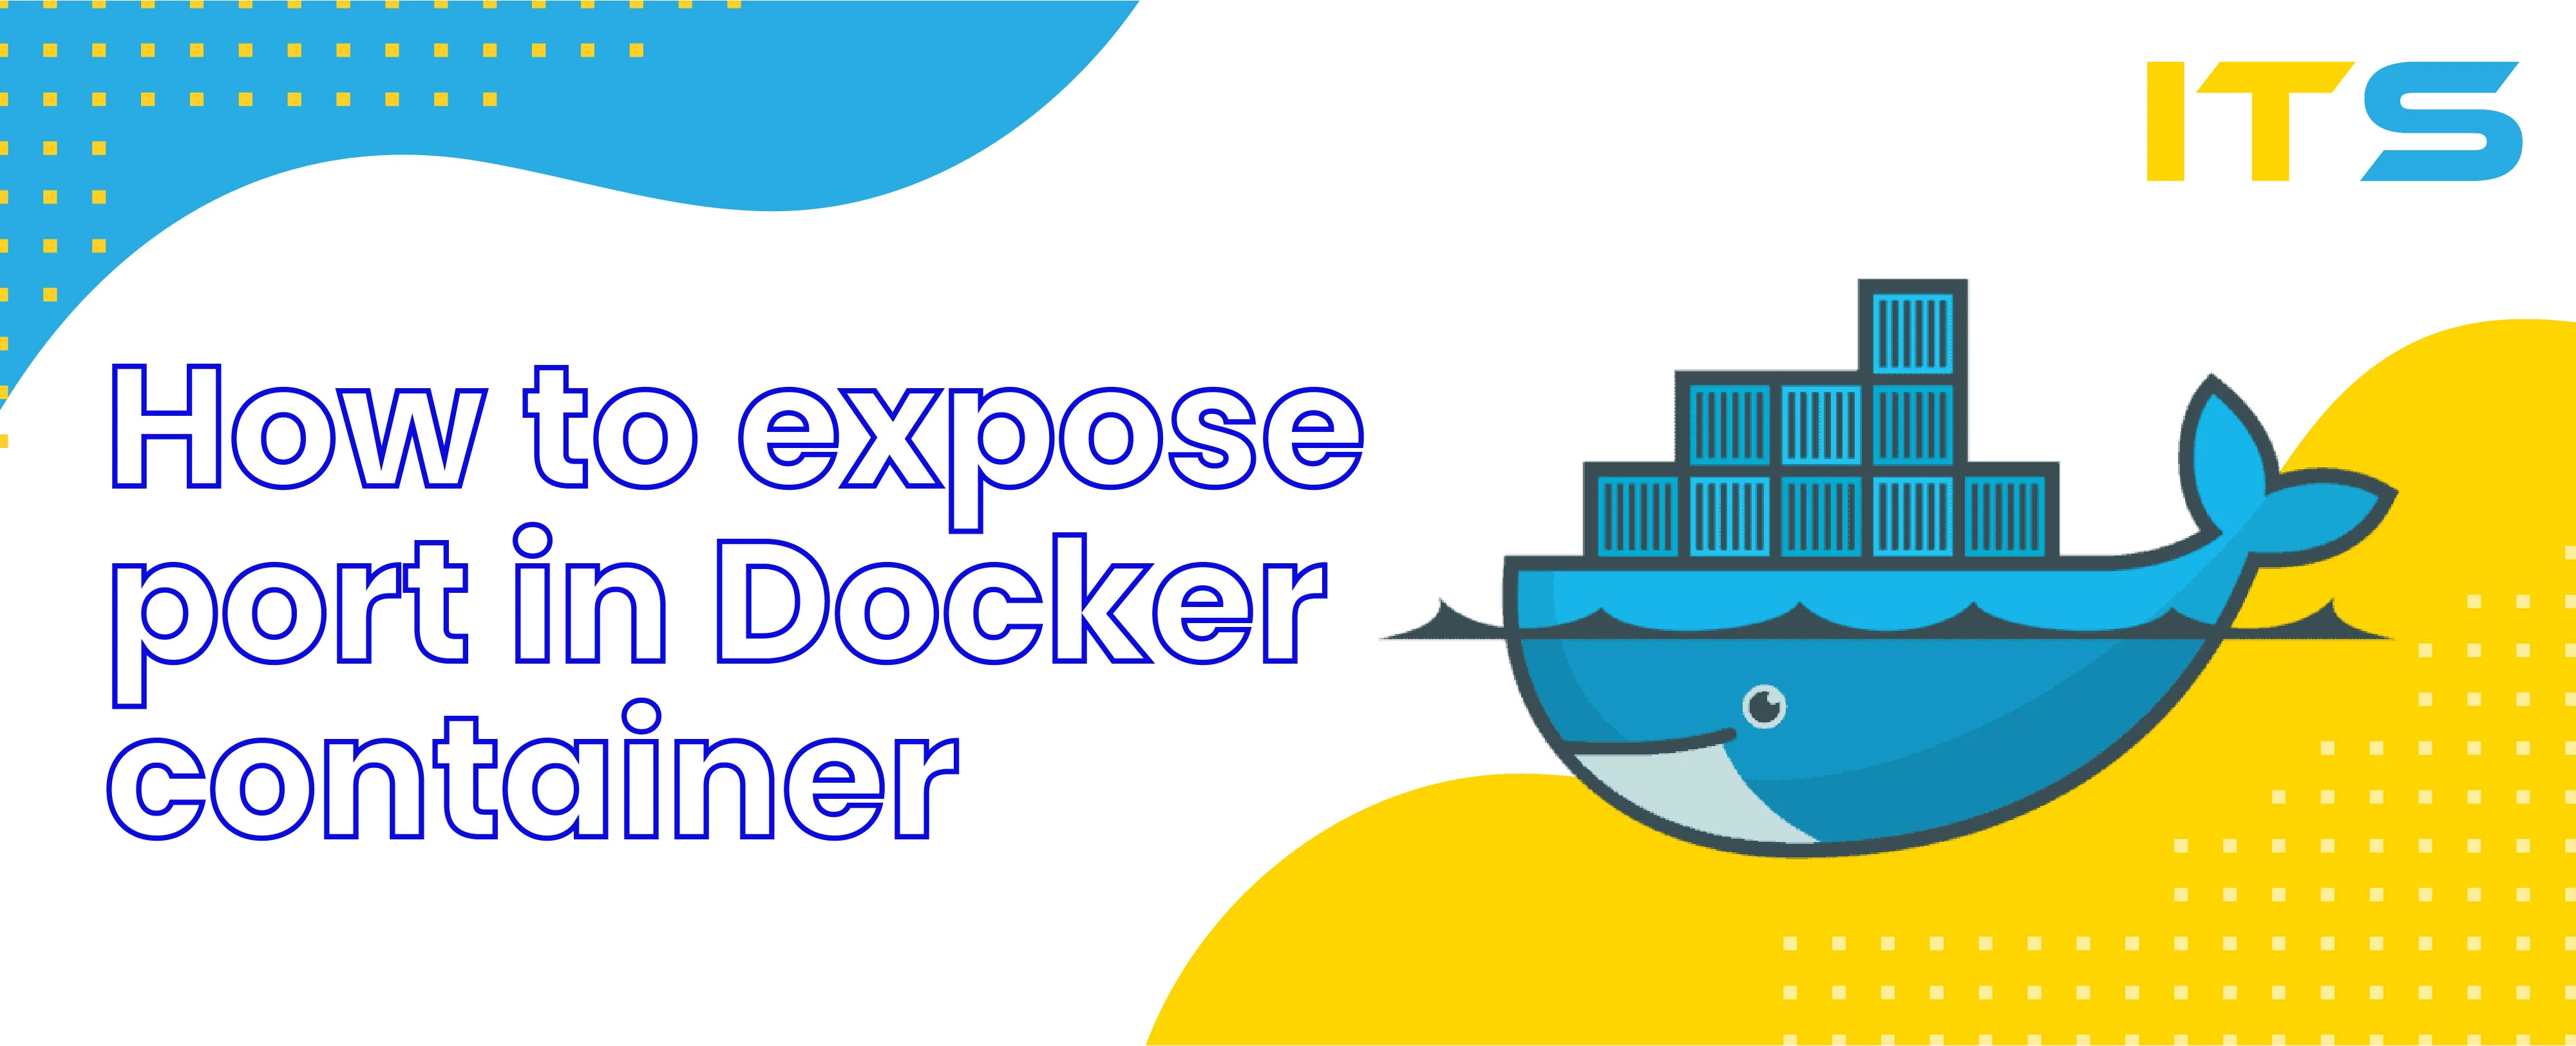 How to expose port in Docker container